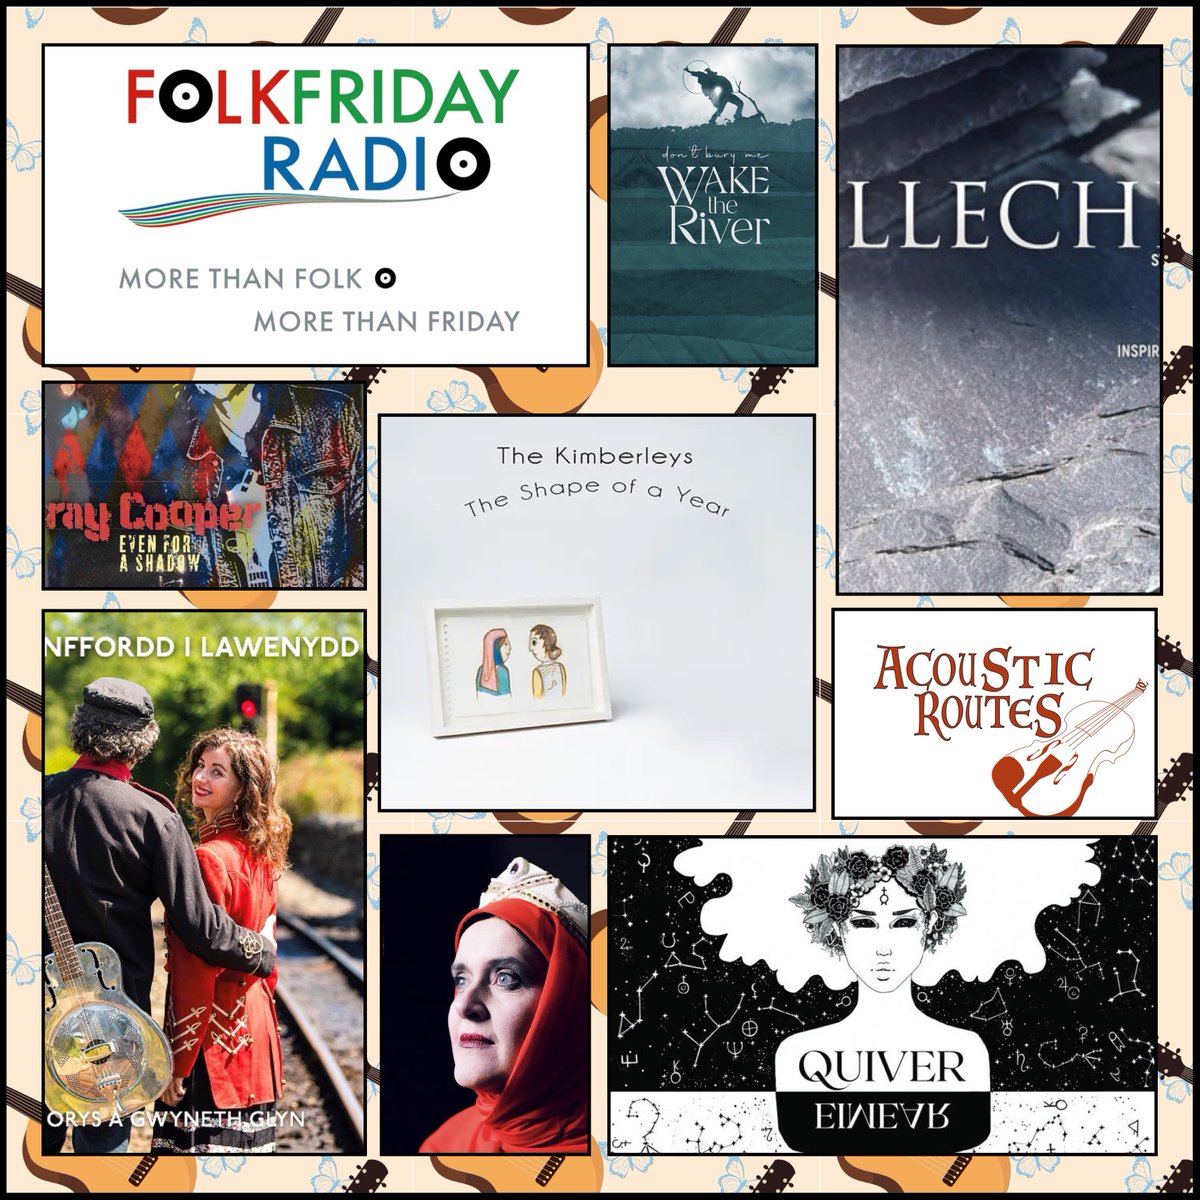 Coming up on @AcousticRoutes show 492, the featured album from @the_kimberleys & music from @twmtrefan a @GwynethGlyn @waketheriver @RaycooperRay @FoxbridgeMusic @StateofUndress @DariaKulesh and @johnacalun Tune in to @folkfridayradio Fri 11pm 🏴󠁧󠁢󠁷󠁬󠁳󠁿🇬🇧 time folkfridayradio.com